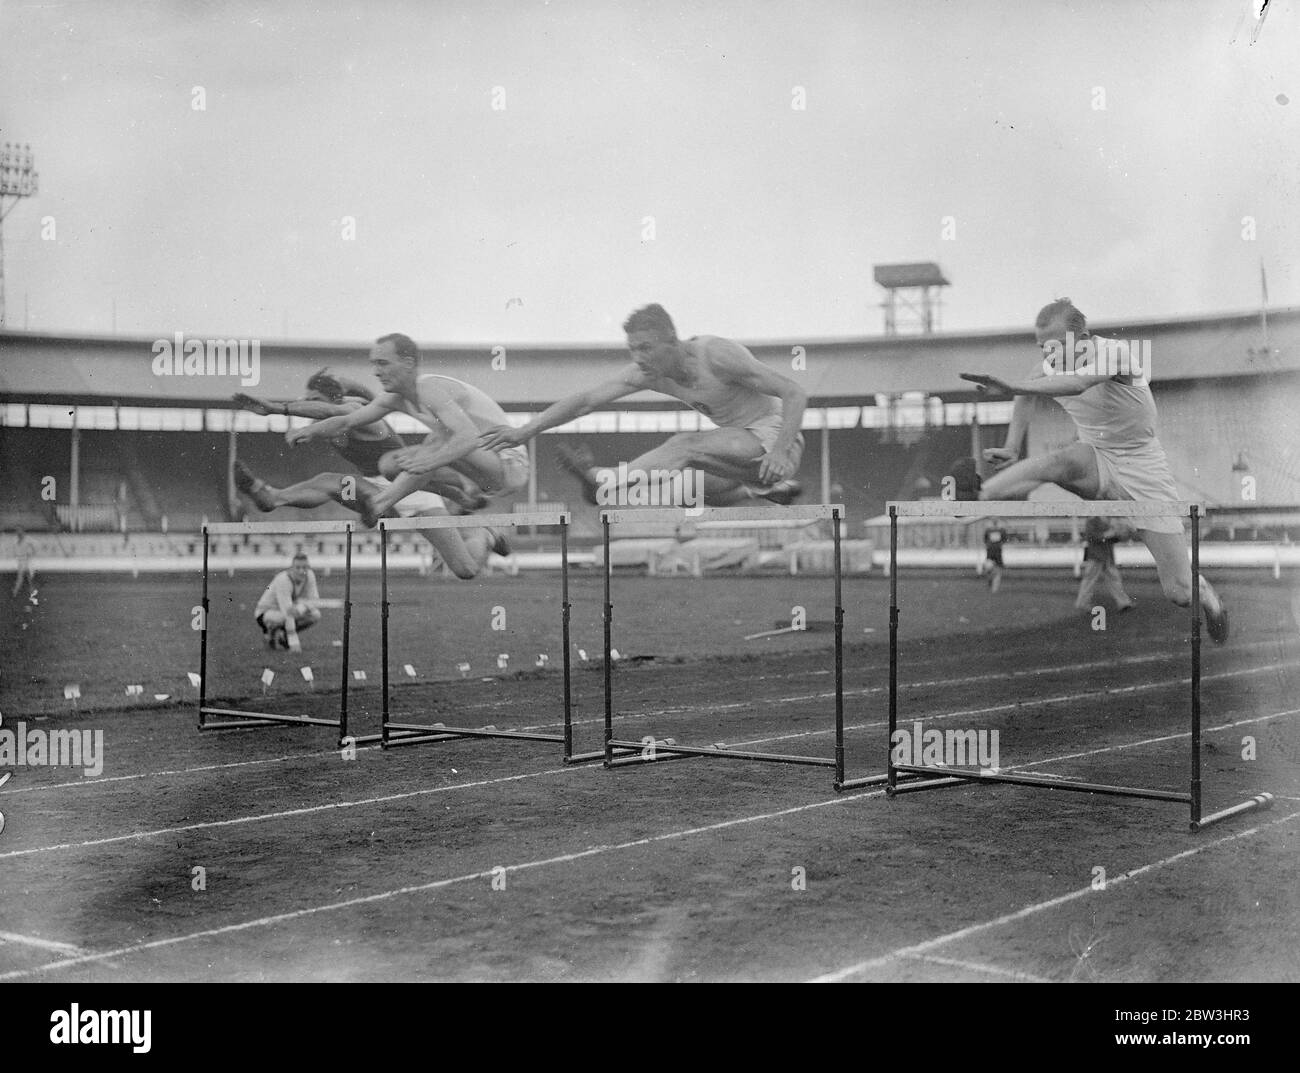 Olympic Champions In The Air Exhibition At Police Sports . Four members of the British Olympic Games team to compete in Berlin next month gave an exibition at the City of London Police Athletic Club annual sports at the White City , London . Photo shows : ( left to right ) I . S . Ivanovic ; J . P . Gabriel ; D . O . Finlay captain of the British team and St . D . Thornton taking a flight of hurdles during their exhibition . 25 Jul 1936 Stock Photo